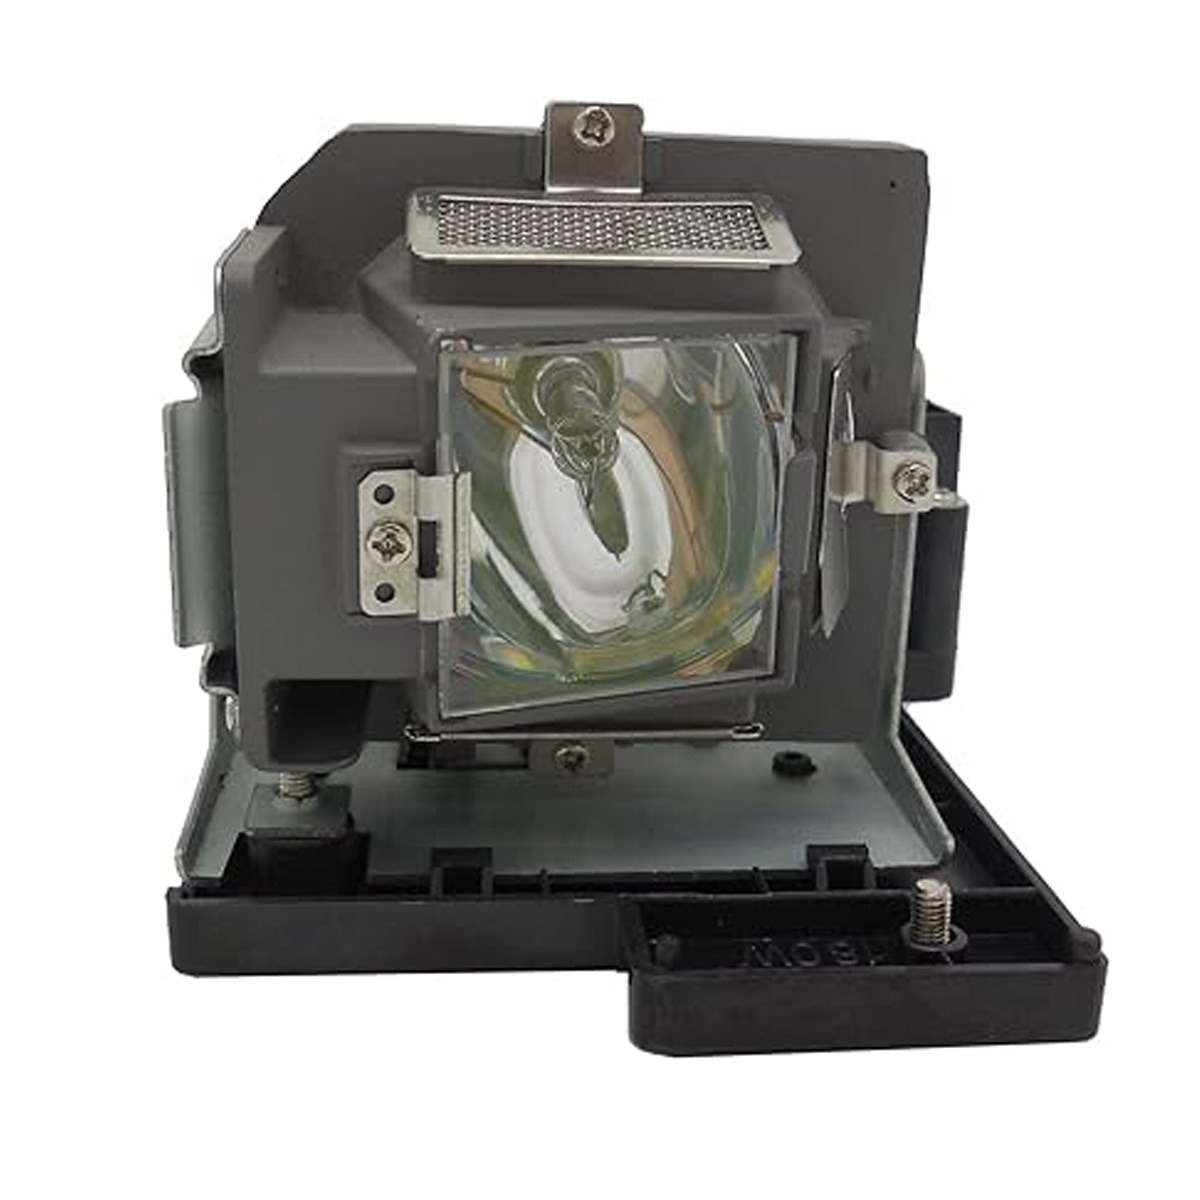 Replacement Projector lamp 5J.J0705.001 For BENQ MP670/W600/ W600+